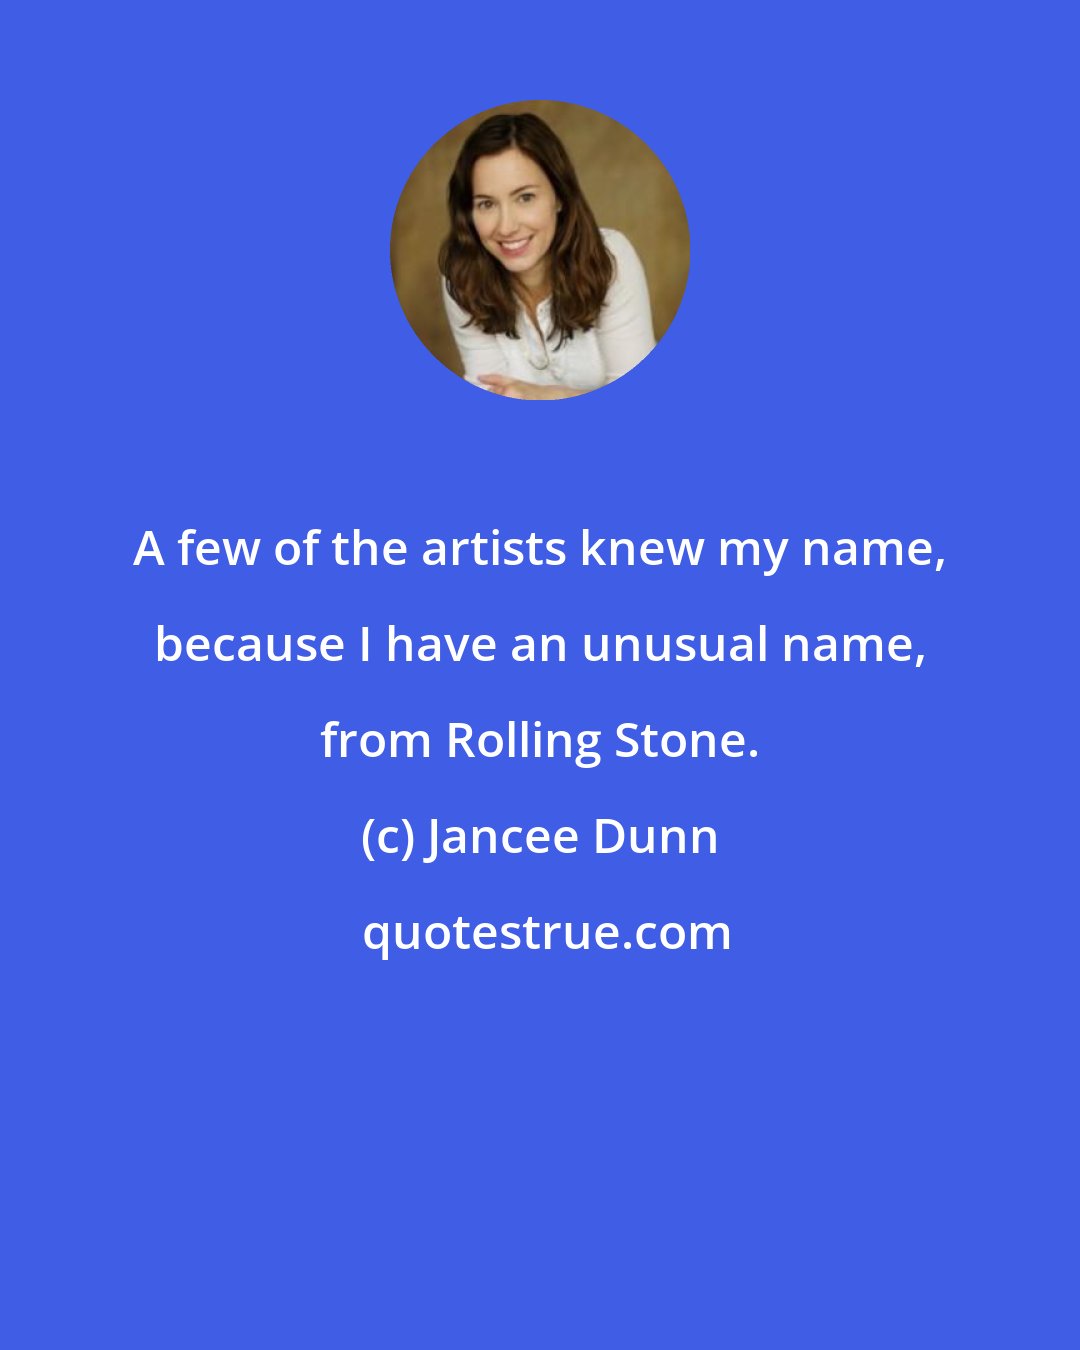 Jancee Dunn: A few of the artists knew my name, because I have an unusual name, from Rolling Stone.